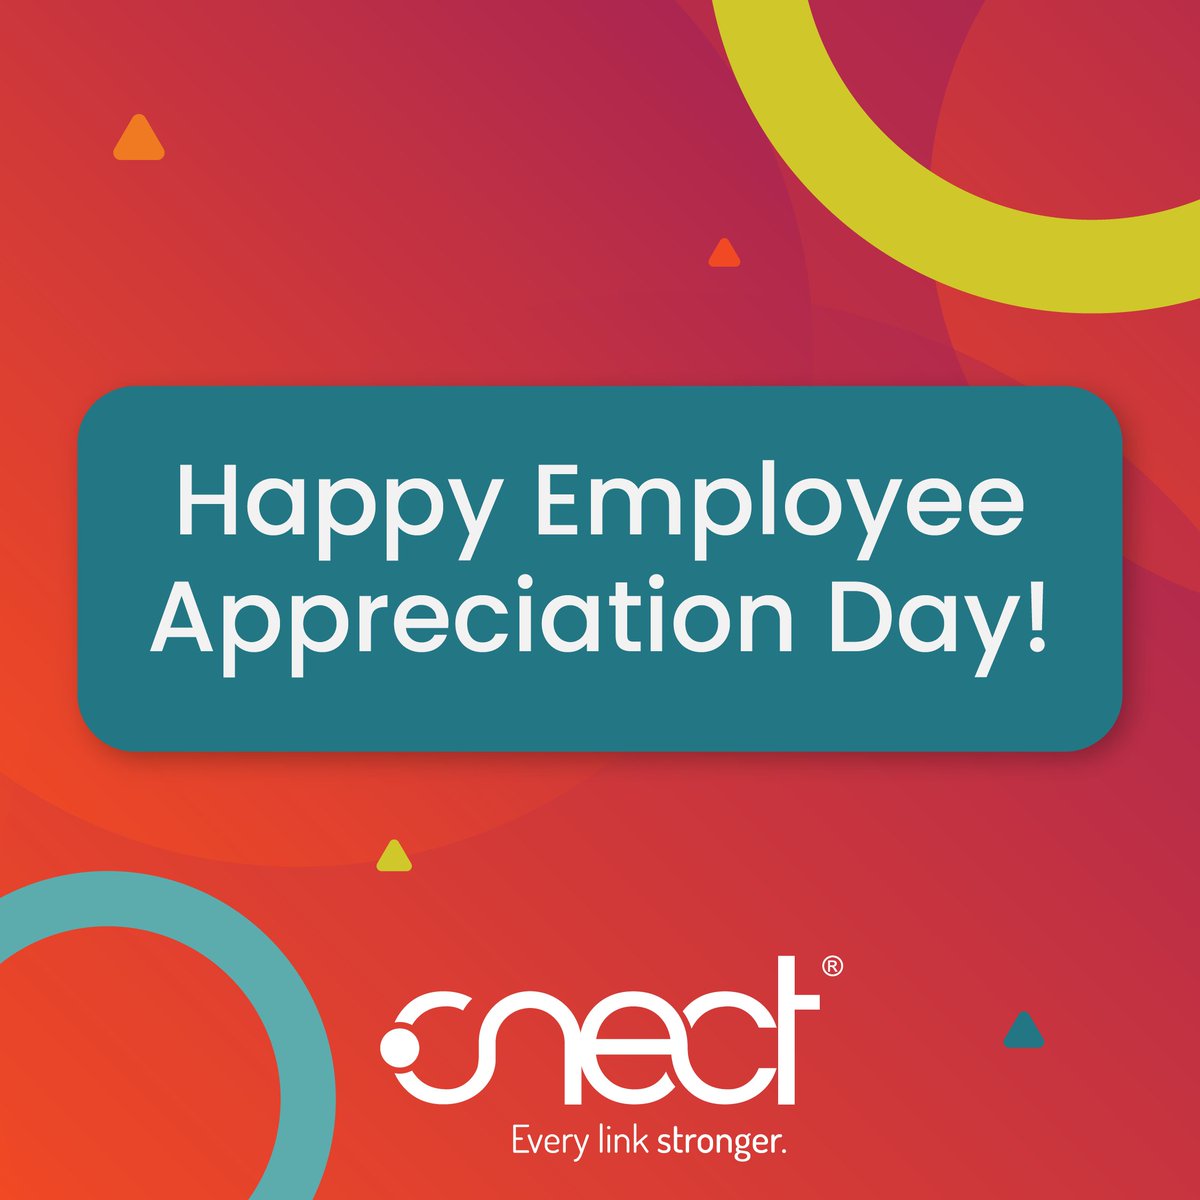 Happy Employee Appreciation Day! Celebrate your hardworking team and their contributions with our portfolio offerings. Find the perfect gift to say, 'Thank you for everything you do.'